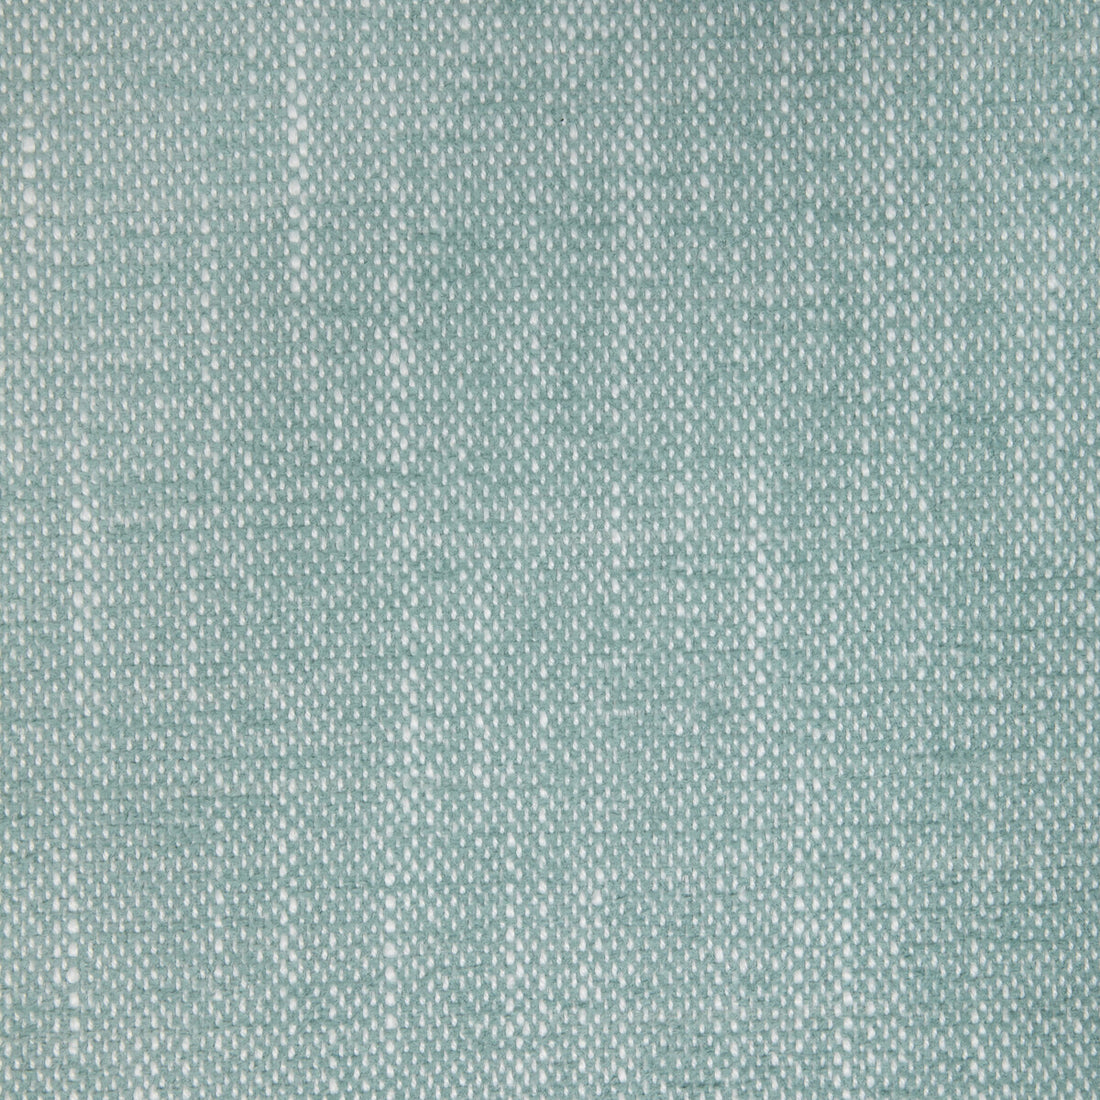 Kravet Smart-36885 fabric in 15 color - pattern 36885.15.0 - by Kravet Smart in the Inside Out Performance Fabrics collection